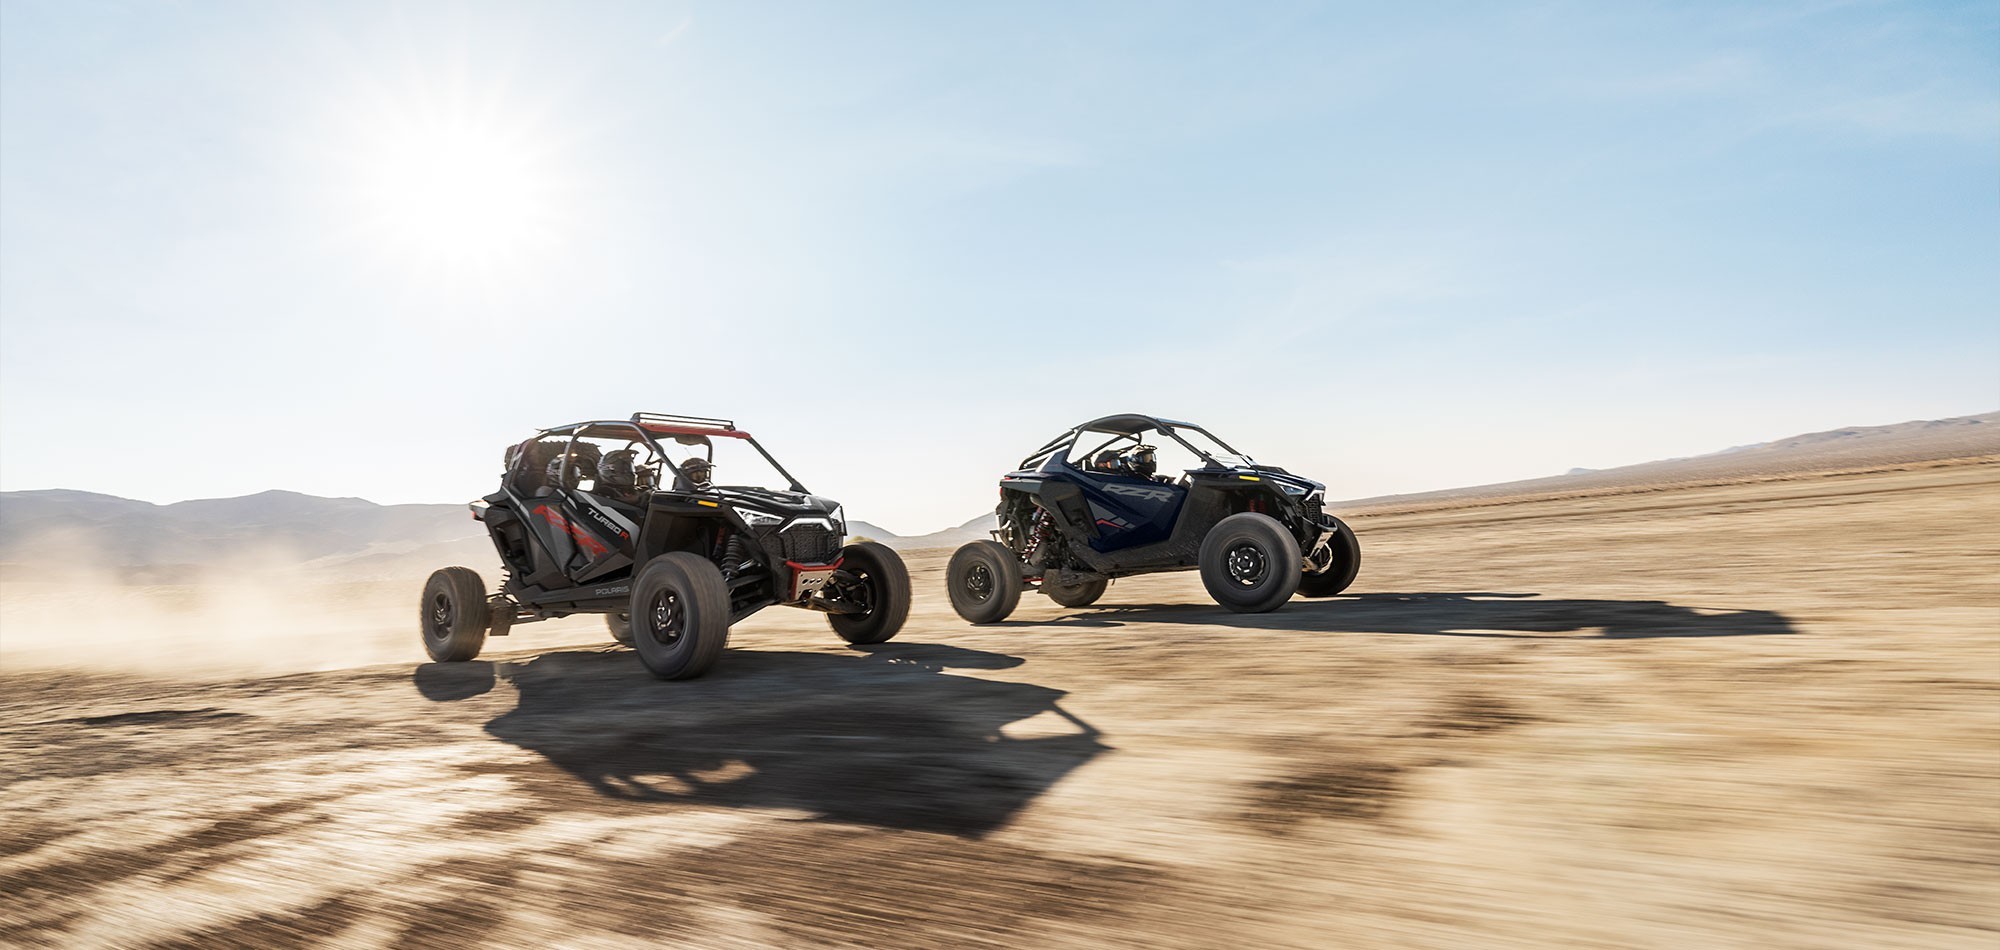 Action image of two Polaris RZR off-road vehicles going fast on a flat, dry desert